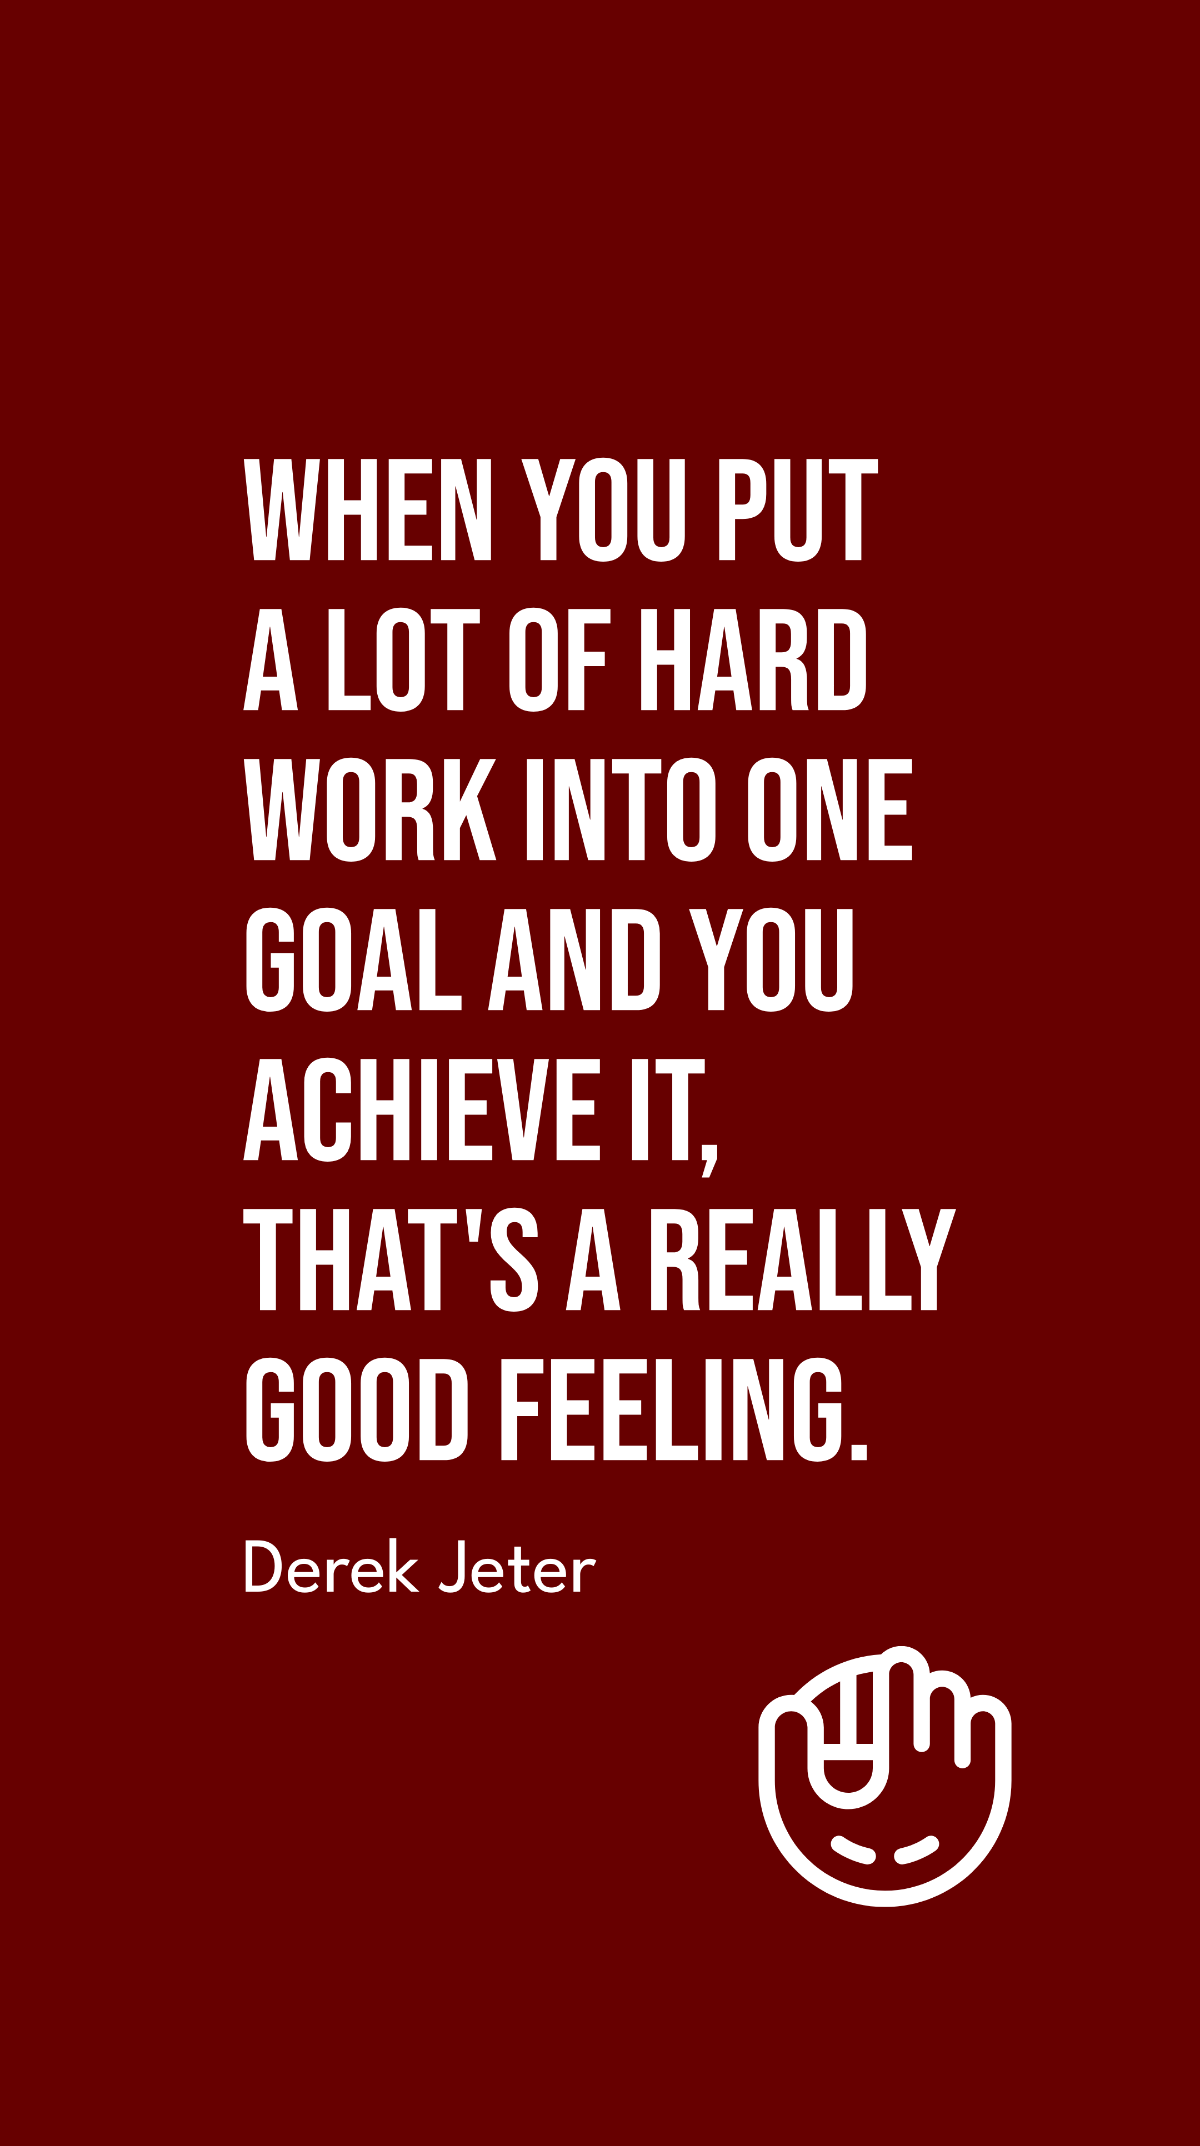 Free Derek Jeter - When you put a lot of hard work into one goal and you achieve it, that's a really good feeling.  Template